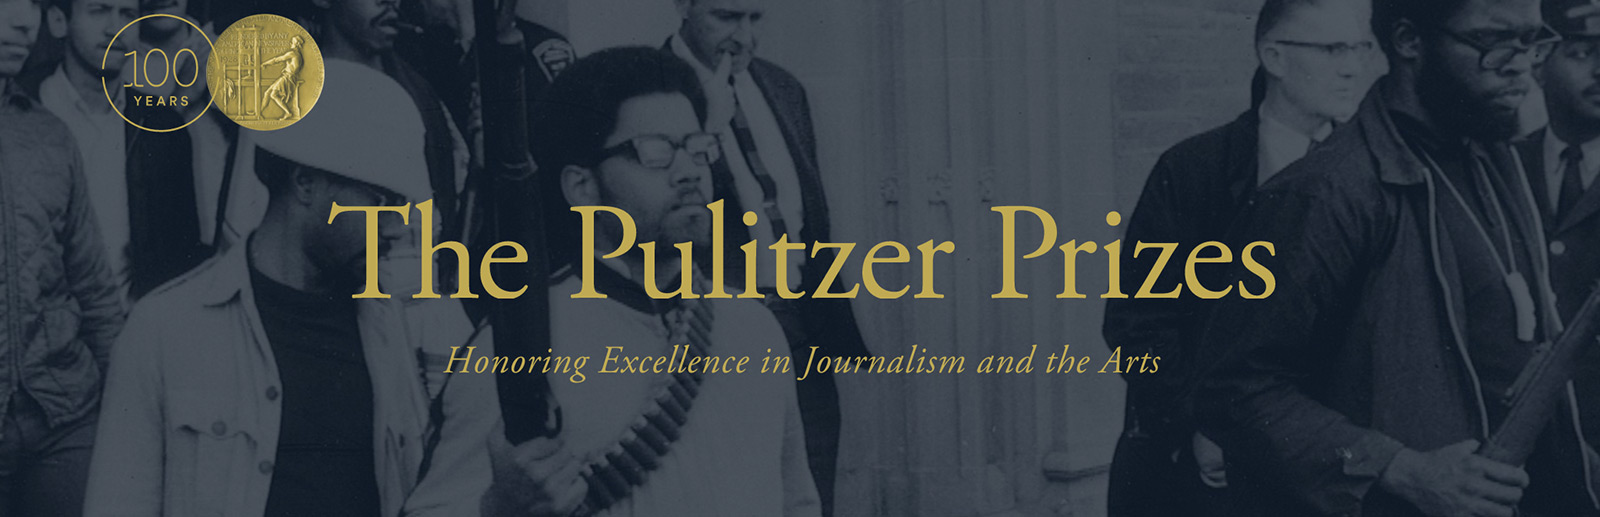 Banner graphic for the Pulitzer Prizes